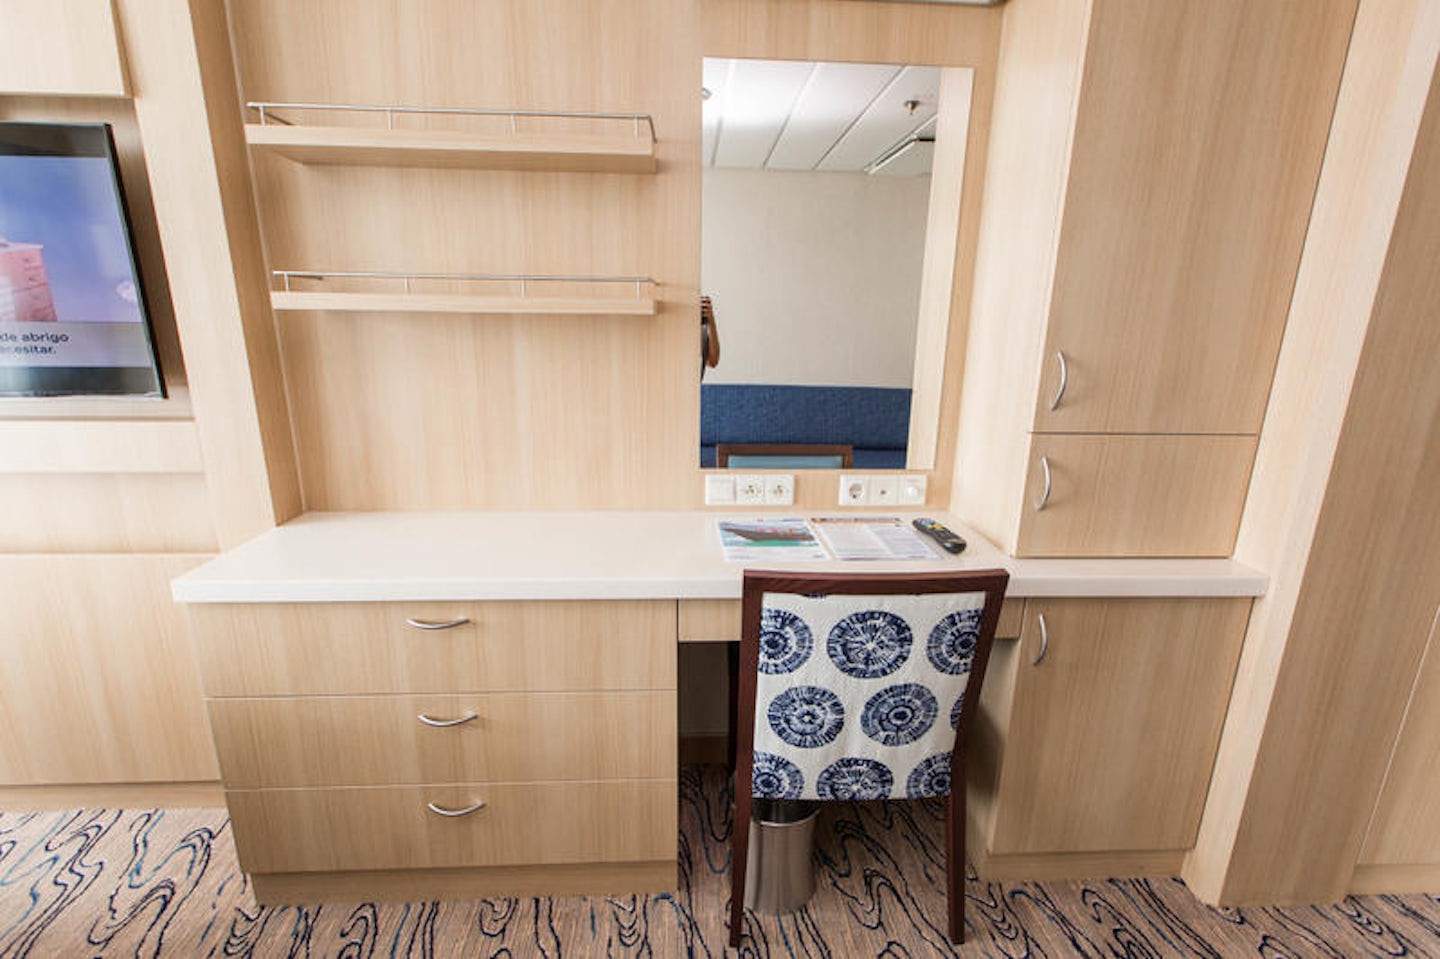 The Panoramic Oceanview Cabin on Liberty of the Seas